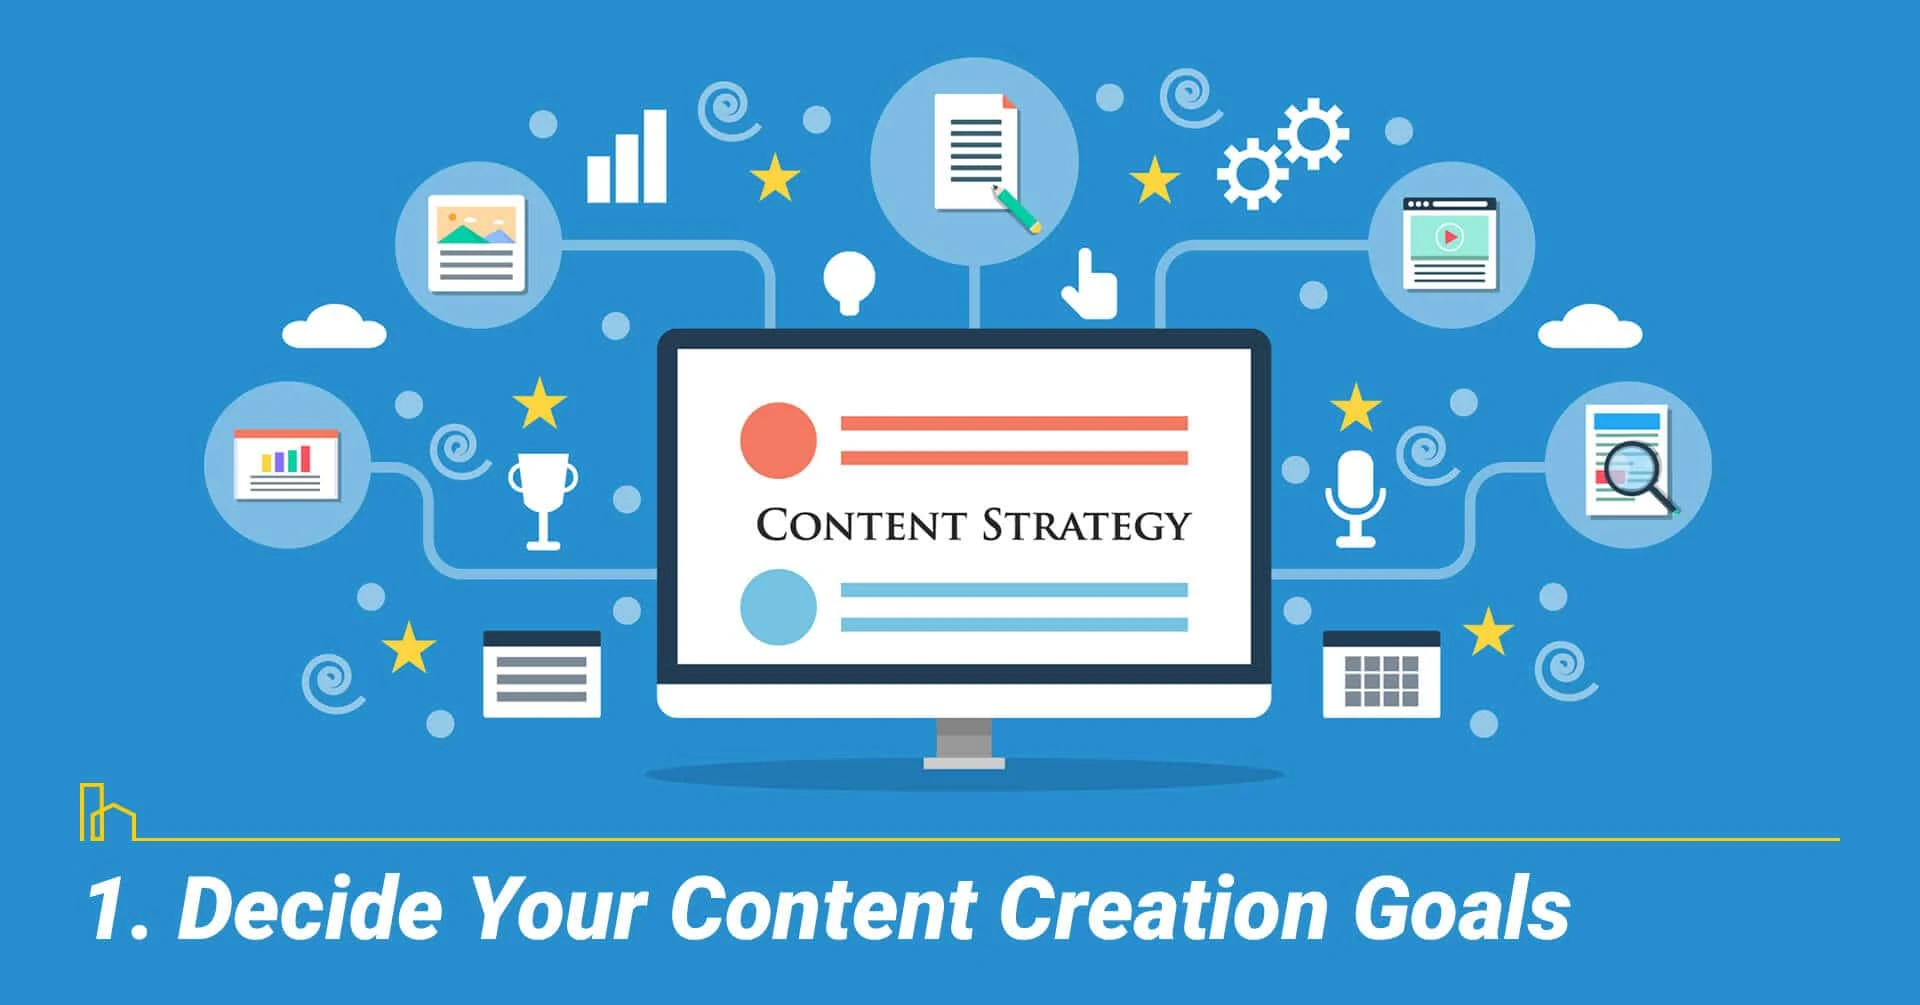 Decide Your Content Creation Goals, content strategy